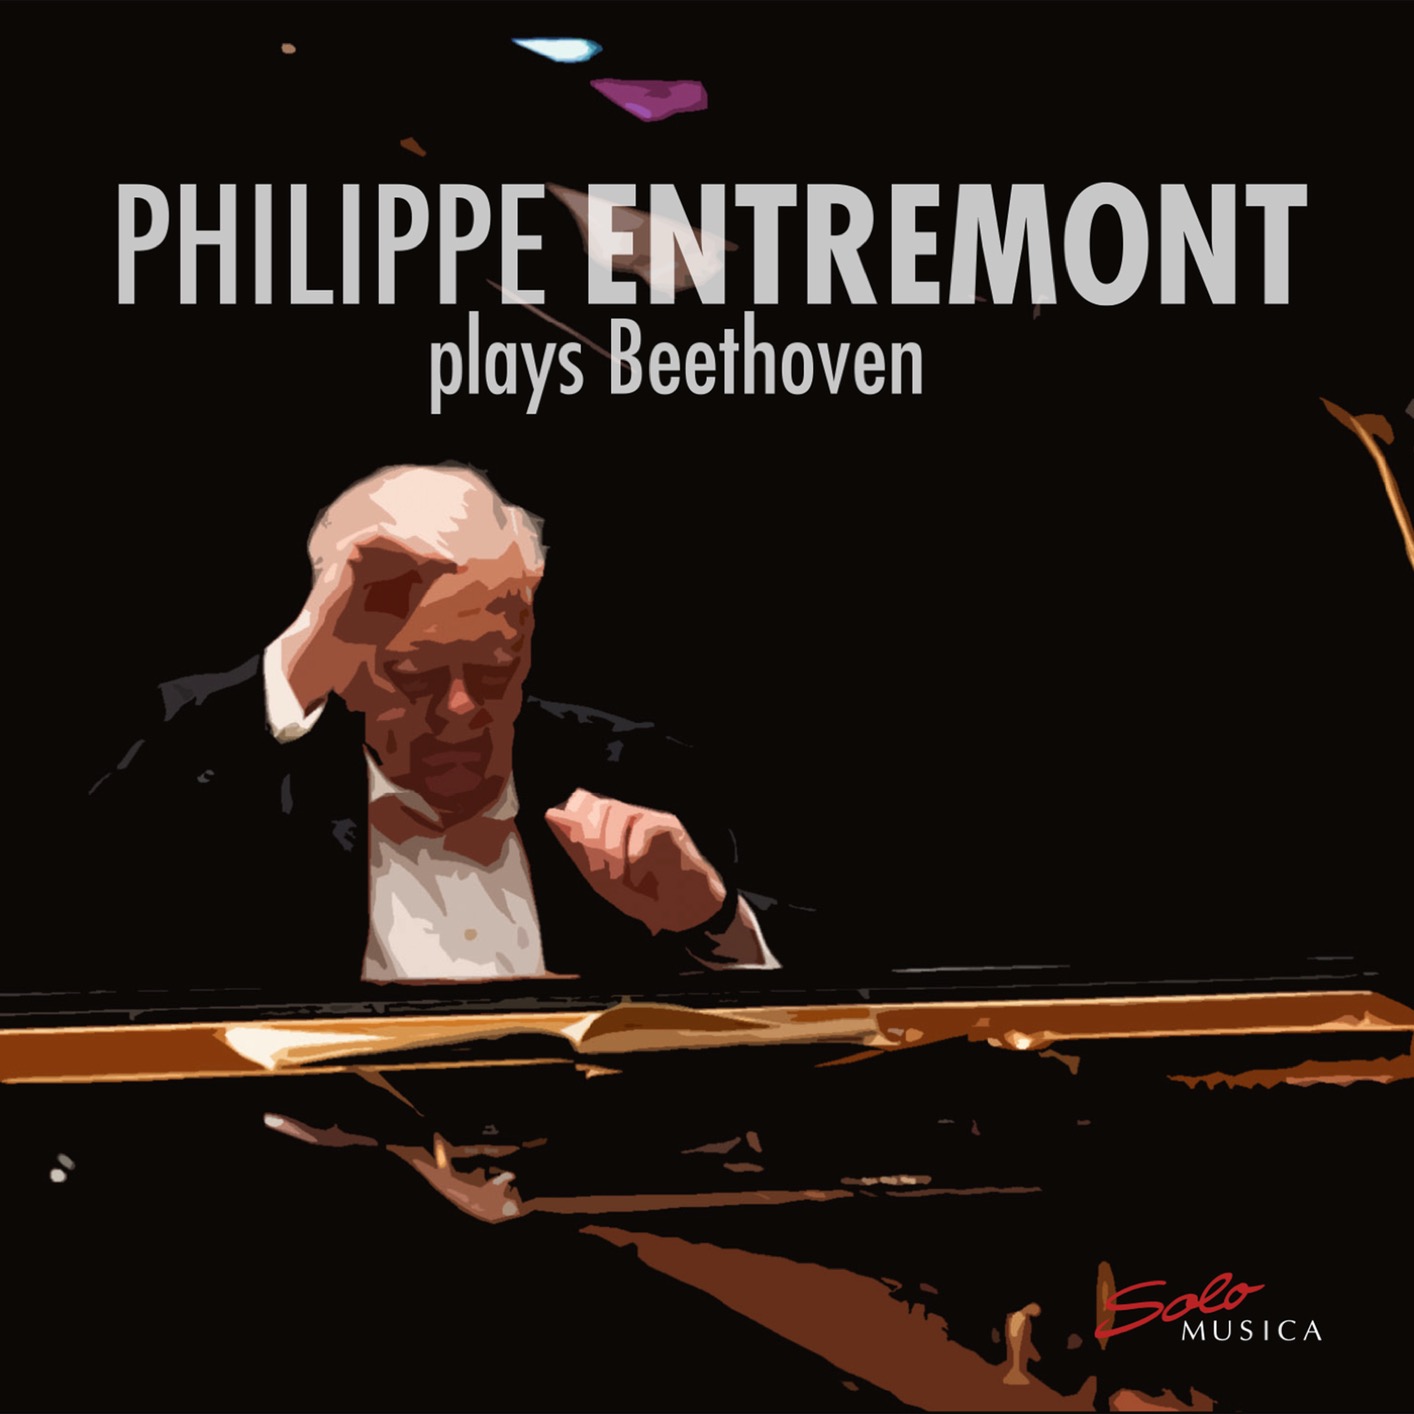 Philippe Entremont - Philippe Entremont plays Beethoven (2019) [FLAC 24bit/88,2kHz]